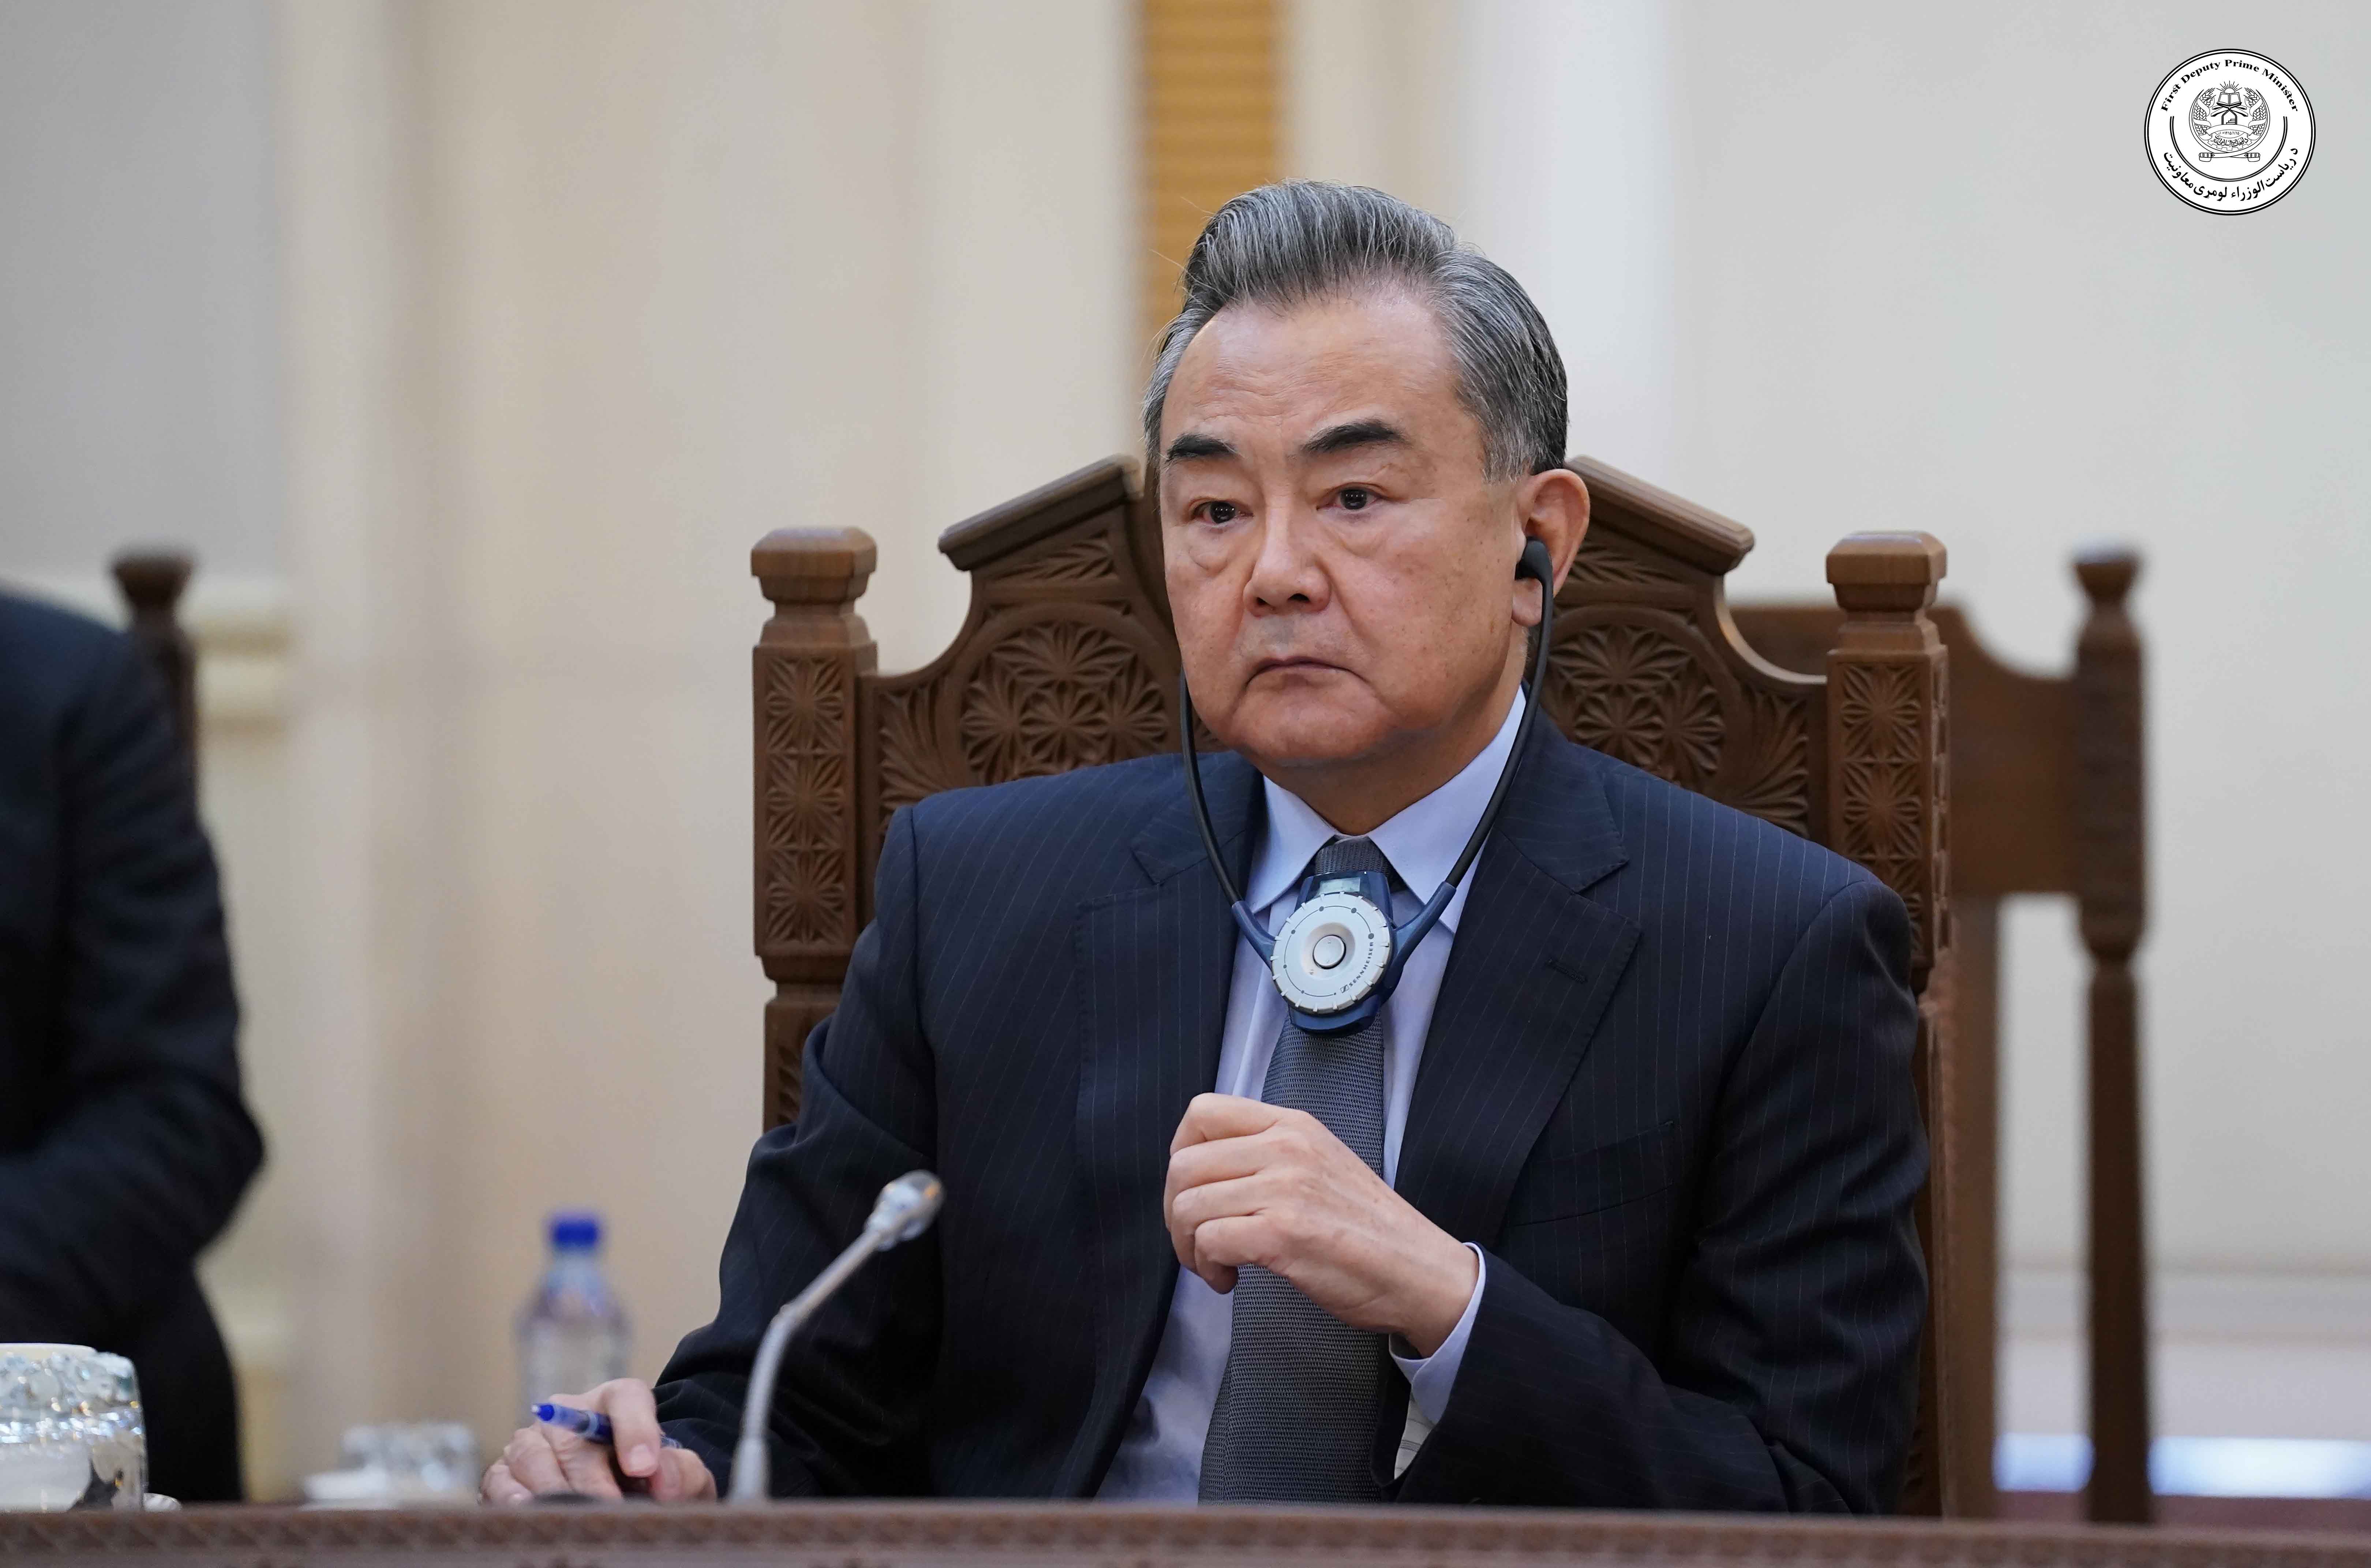 Wang Yi, Foreign Minister of the People's Republic of China, meets with First Deputy PM